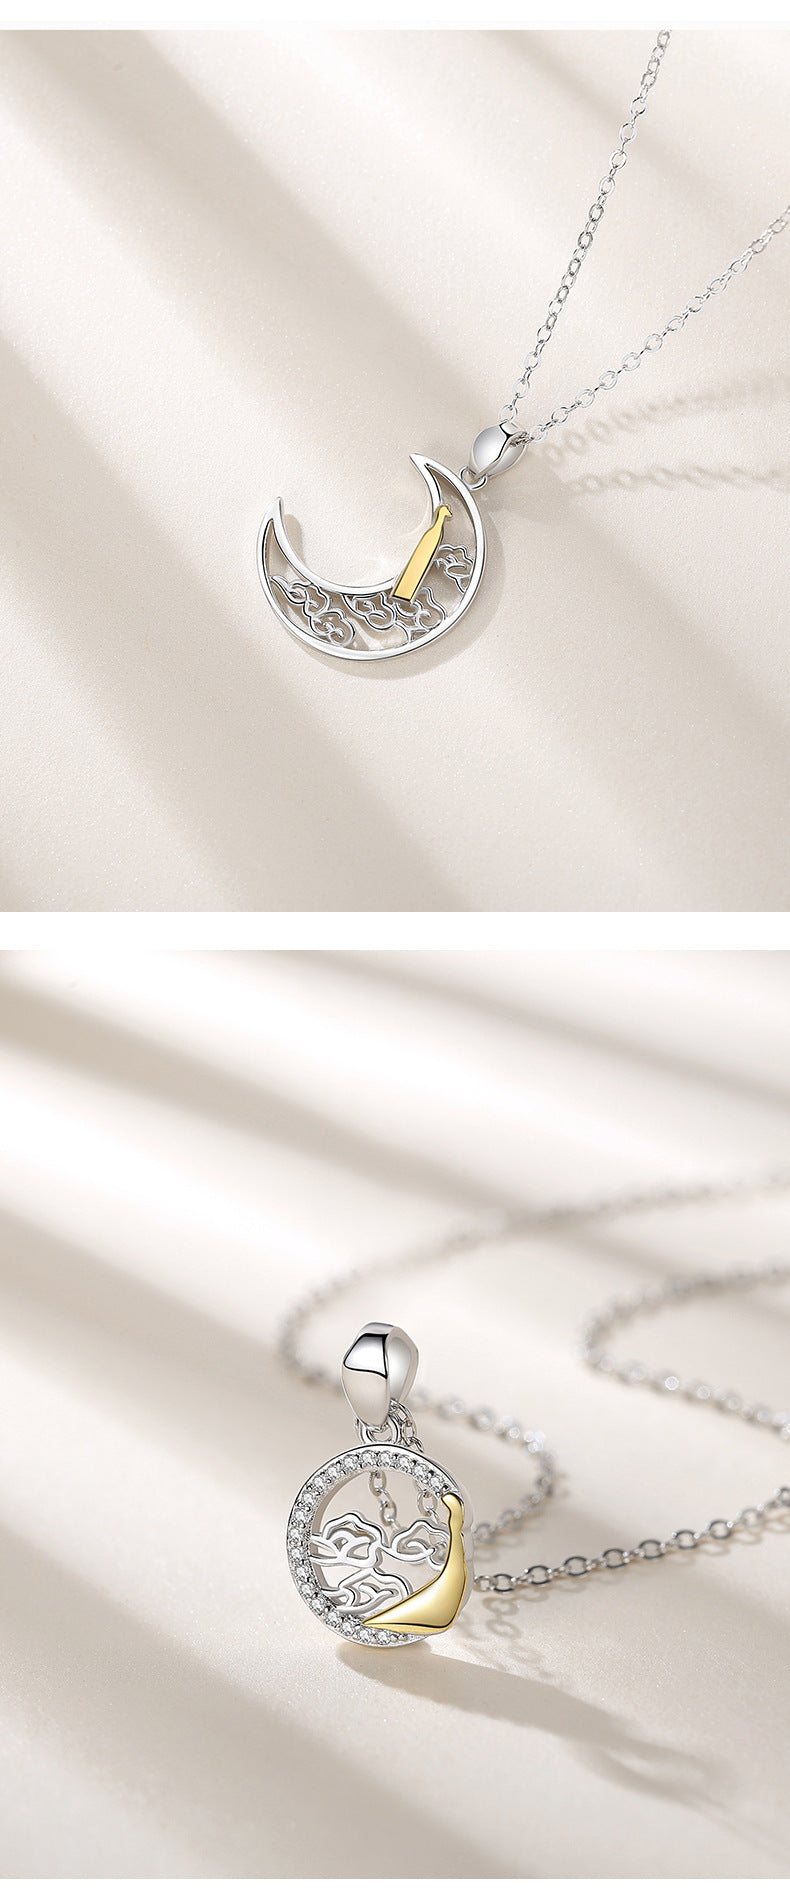 Sun and Moon Couple Relationship Necklaces Set